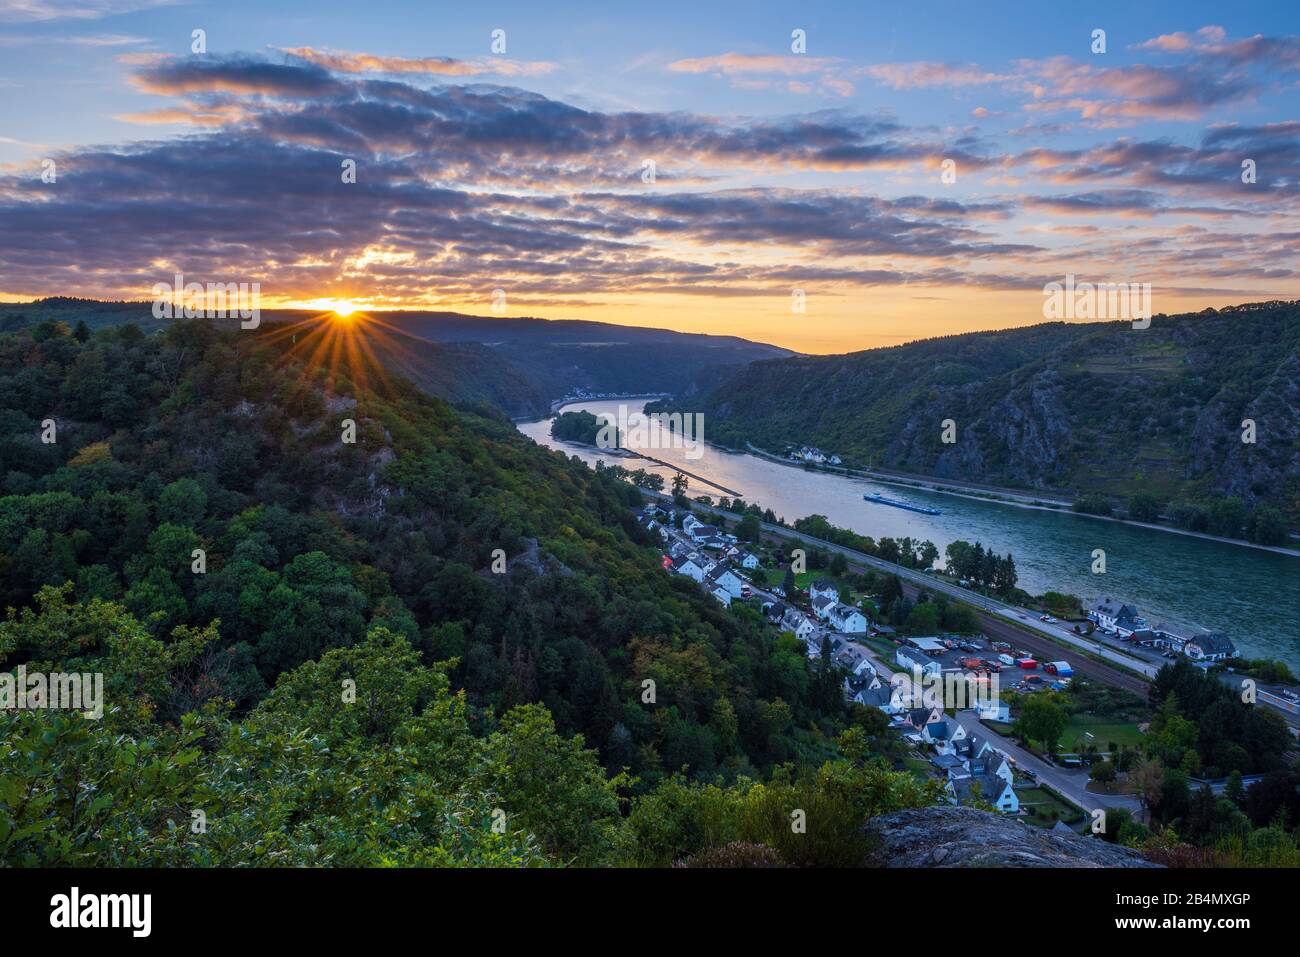 Germany, Rhineland-Palatinate, Fellen, St. Goar, world heritage cultural landscape Upper Middle Rhine Valley, view of the Rhine at sunset Stock Photo